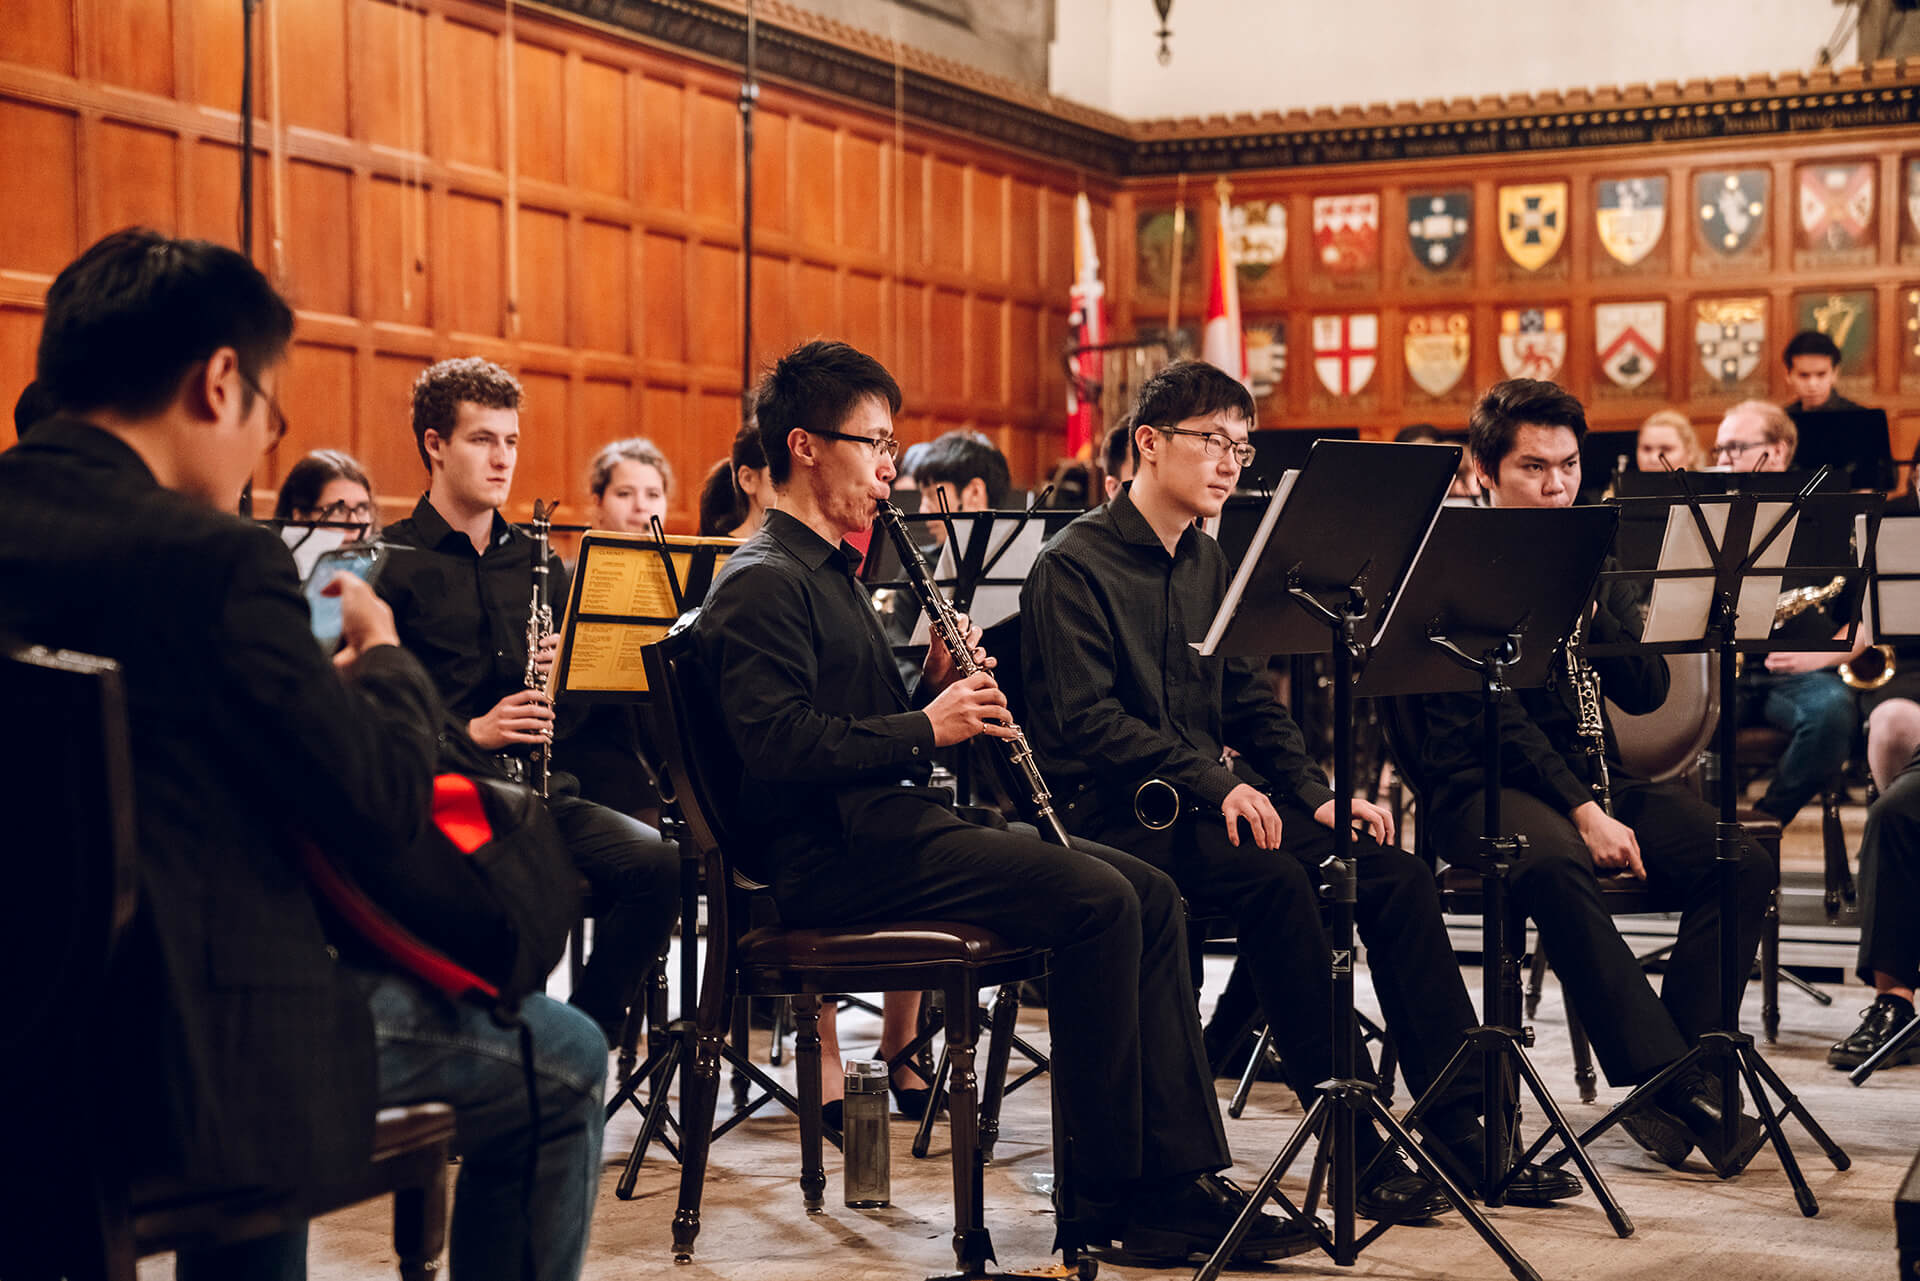 Band sitting with their musical instruments and a large collection of heraldry shields display on the wall beside them